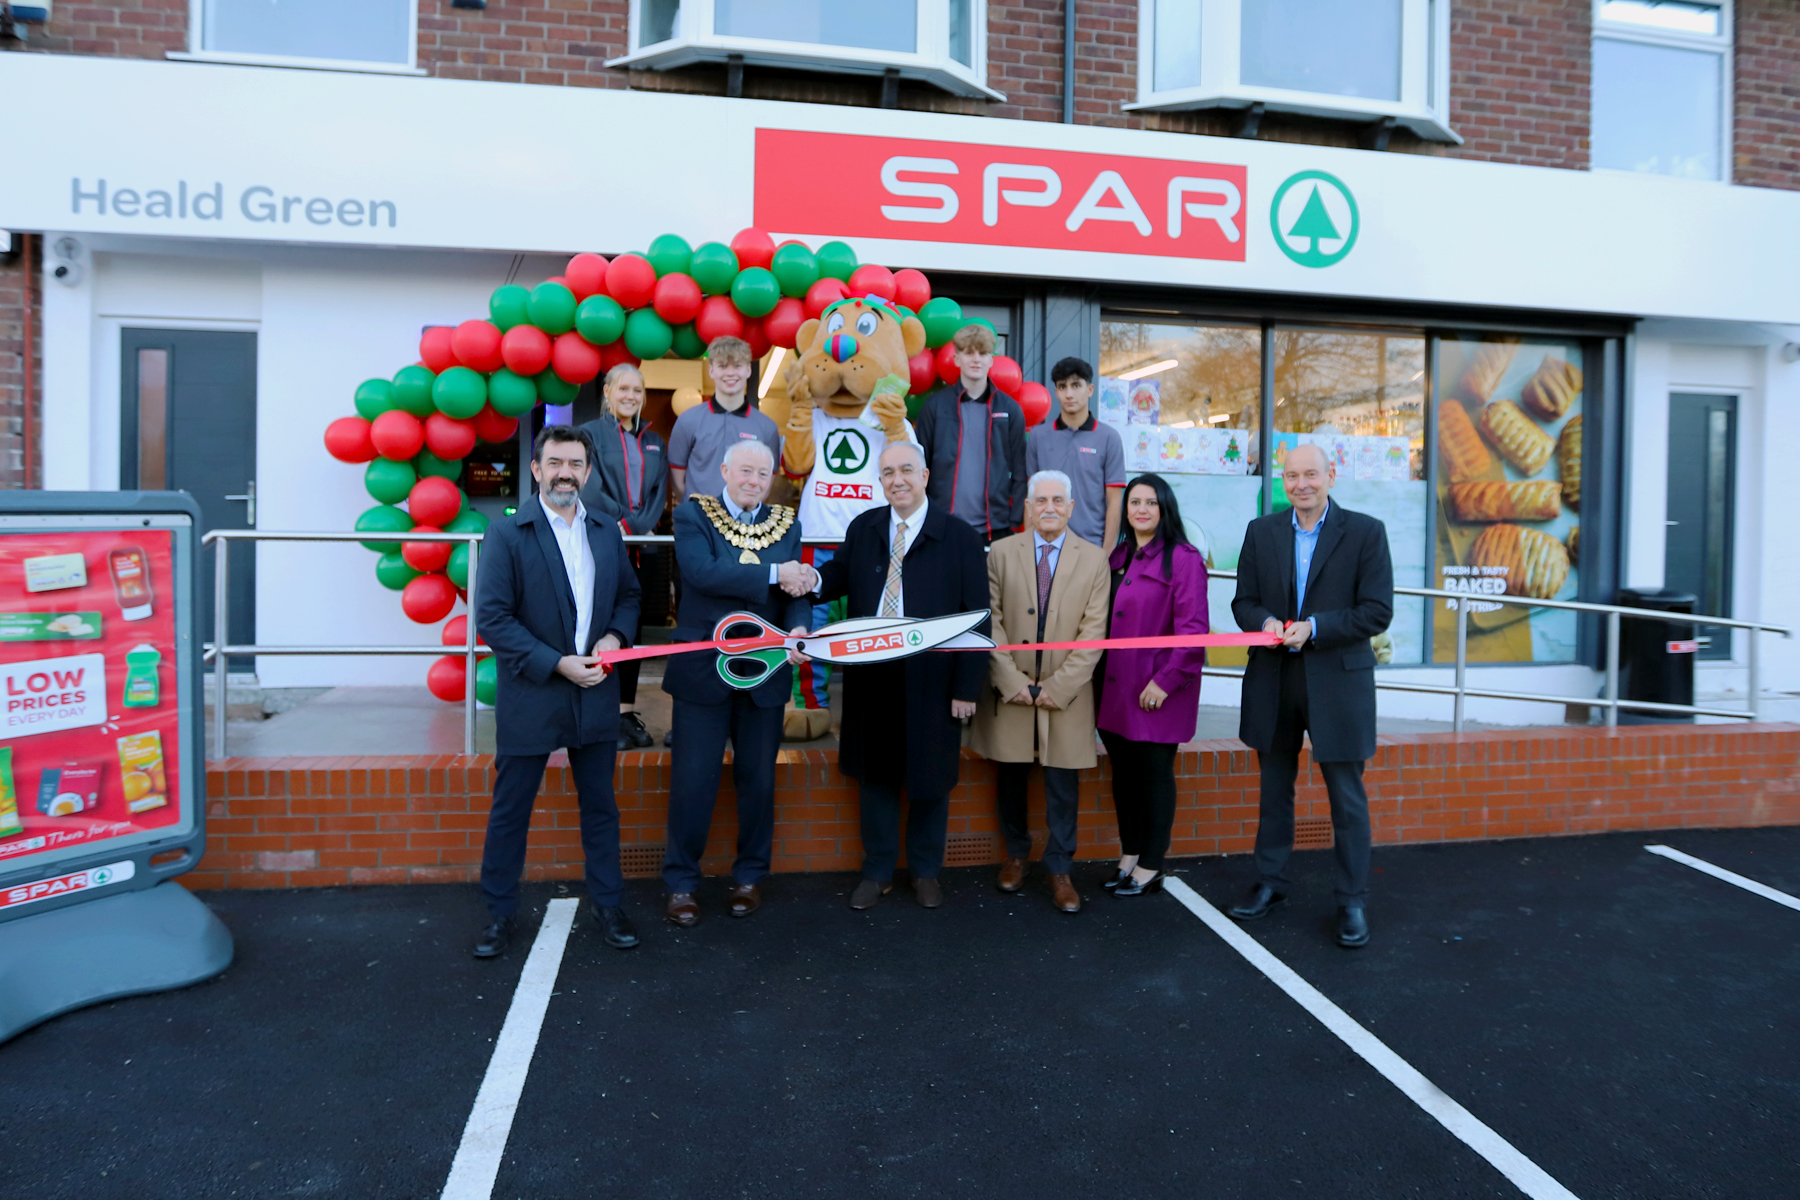 New independent Dr Hamid Hashemi launches SPAR store in Heald Green